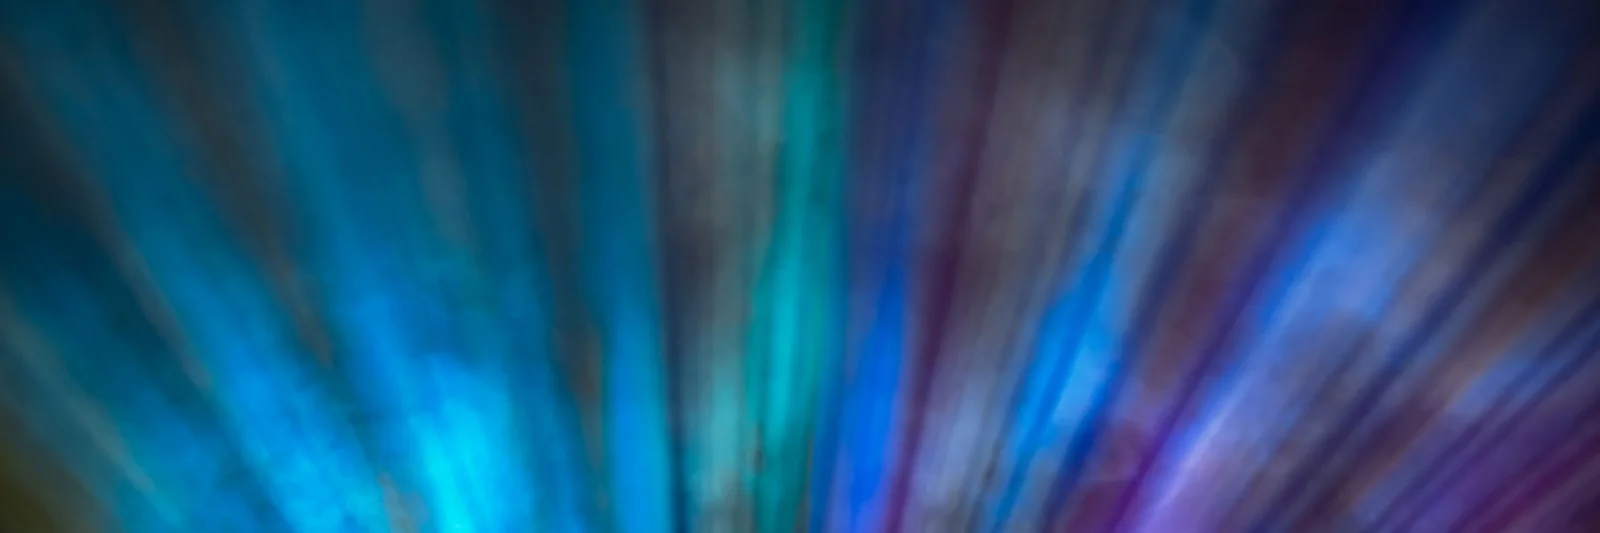 This key visual for the Smaragd Compliance Suite features an abstract composition of blue and purple light streaks, radiating outward in a dynamic and vibrant display. The colors and motion convey a sense of innovation, technology, and complexity, reflecting the advanced capabilities of the Smaragd Compliance Suite in managing and ensuring regulatory compliance. The visual effect evokes a futuristic and high-tech atmosphere, aligning with the suite&#039;s cutting-edge solutions for financial institutions.